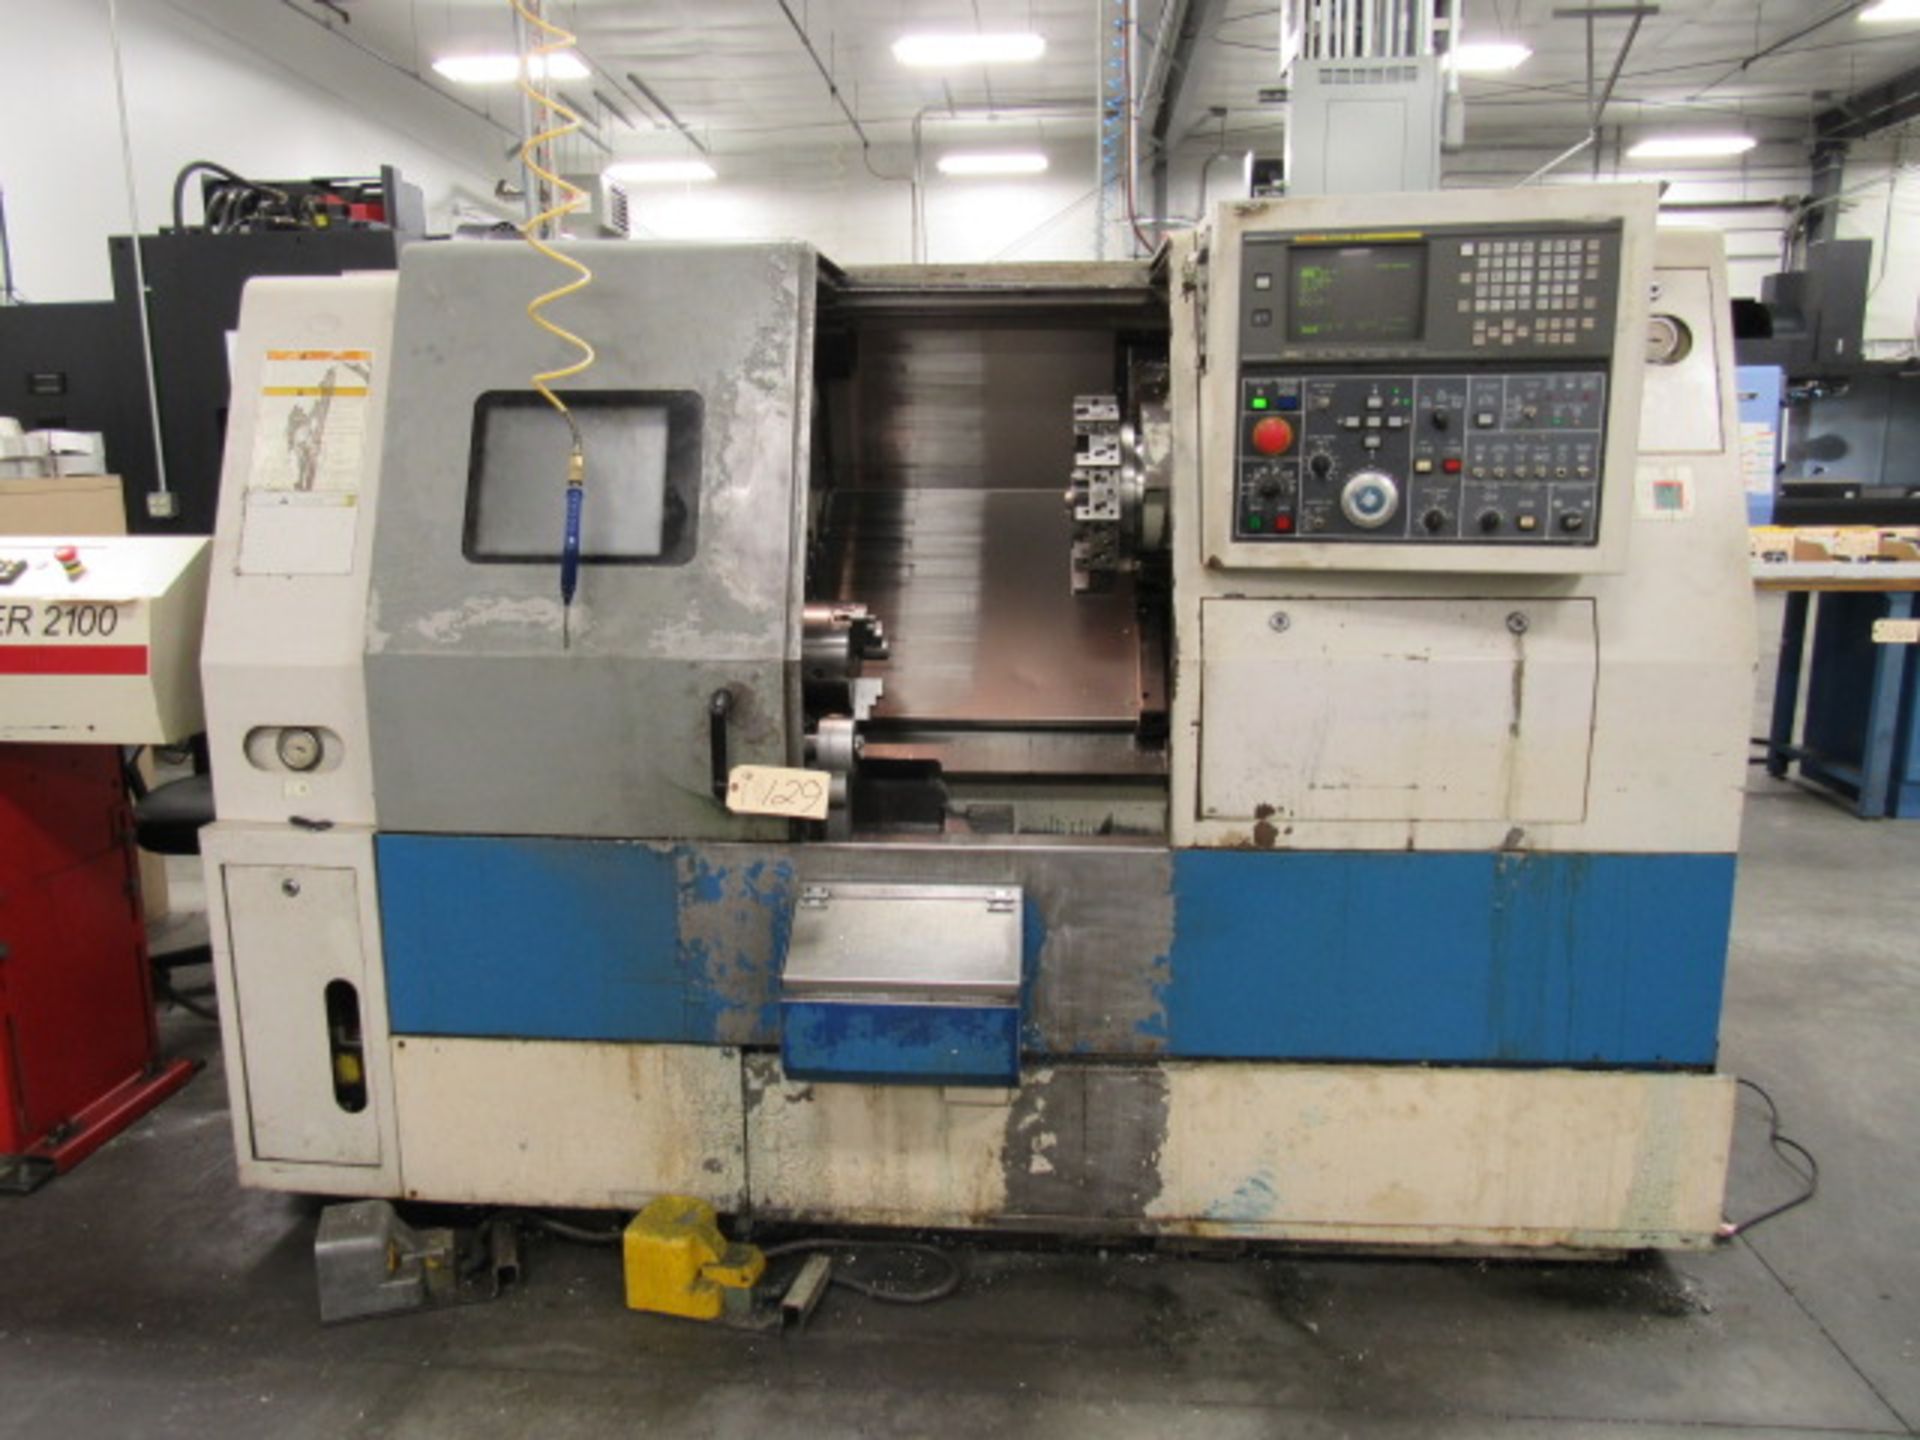 Daewoo Puma 200C CNC Turning Centers with 8'' 3-Jaw Chucks, 21'' Swing x 26.3'' Centers, Spindle - Image 8 of 8